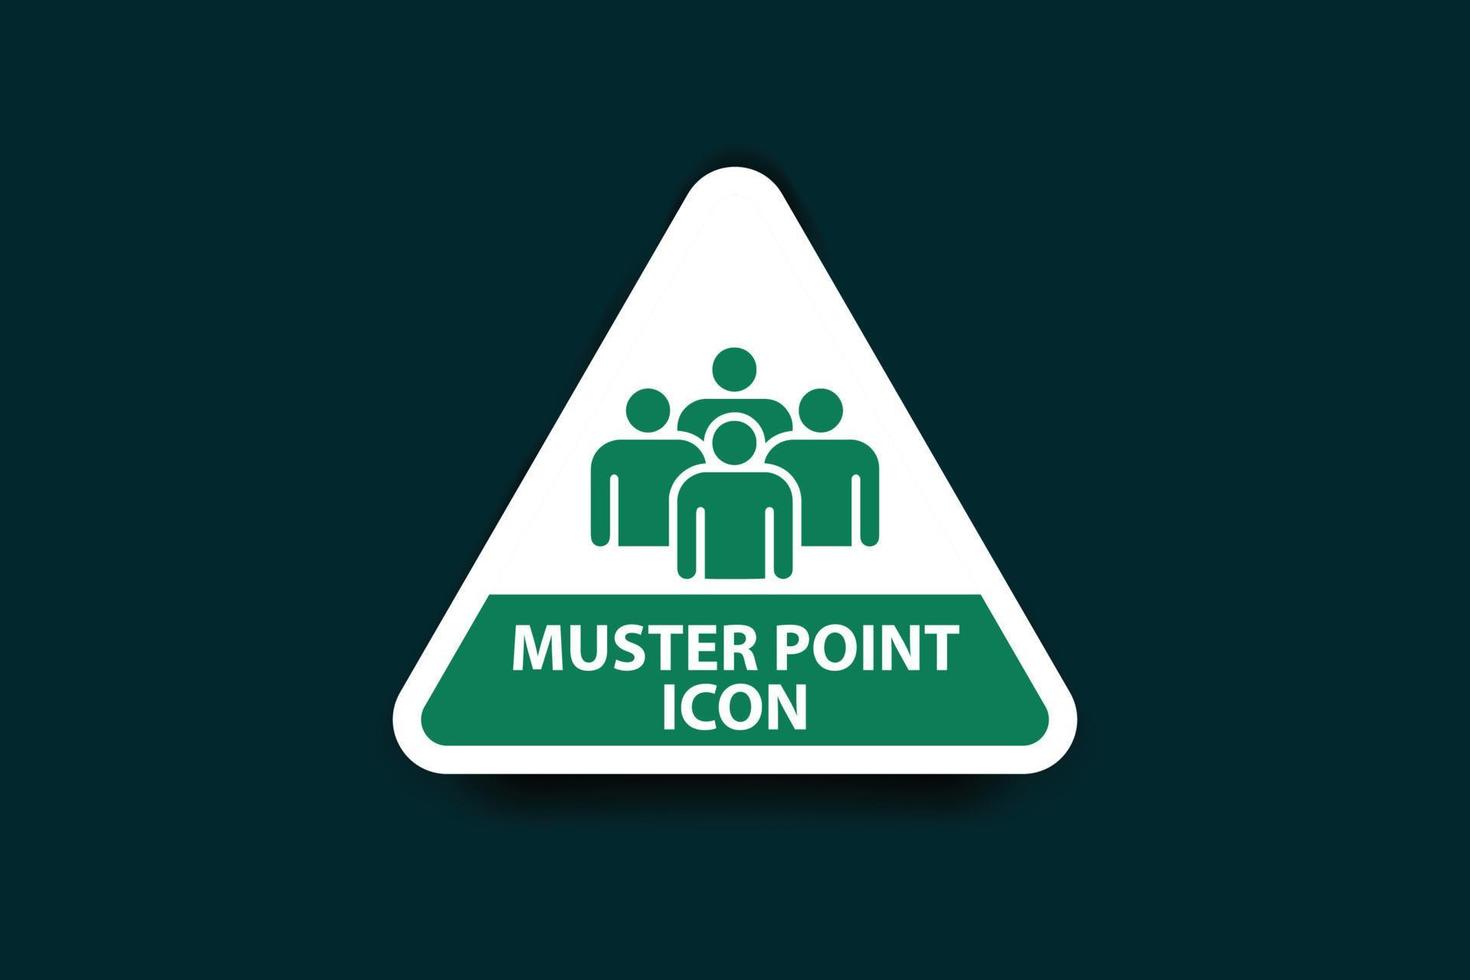 Muster point icon design vector